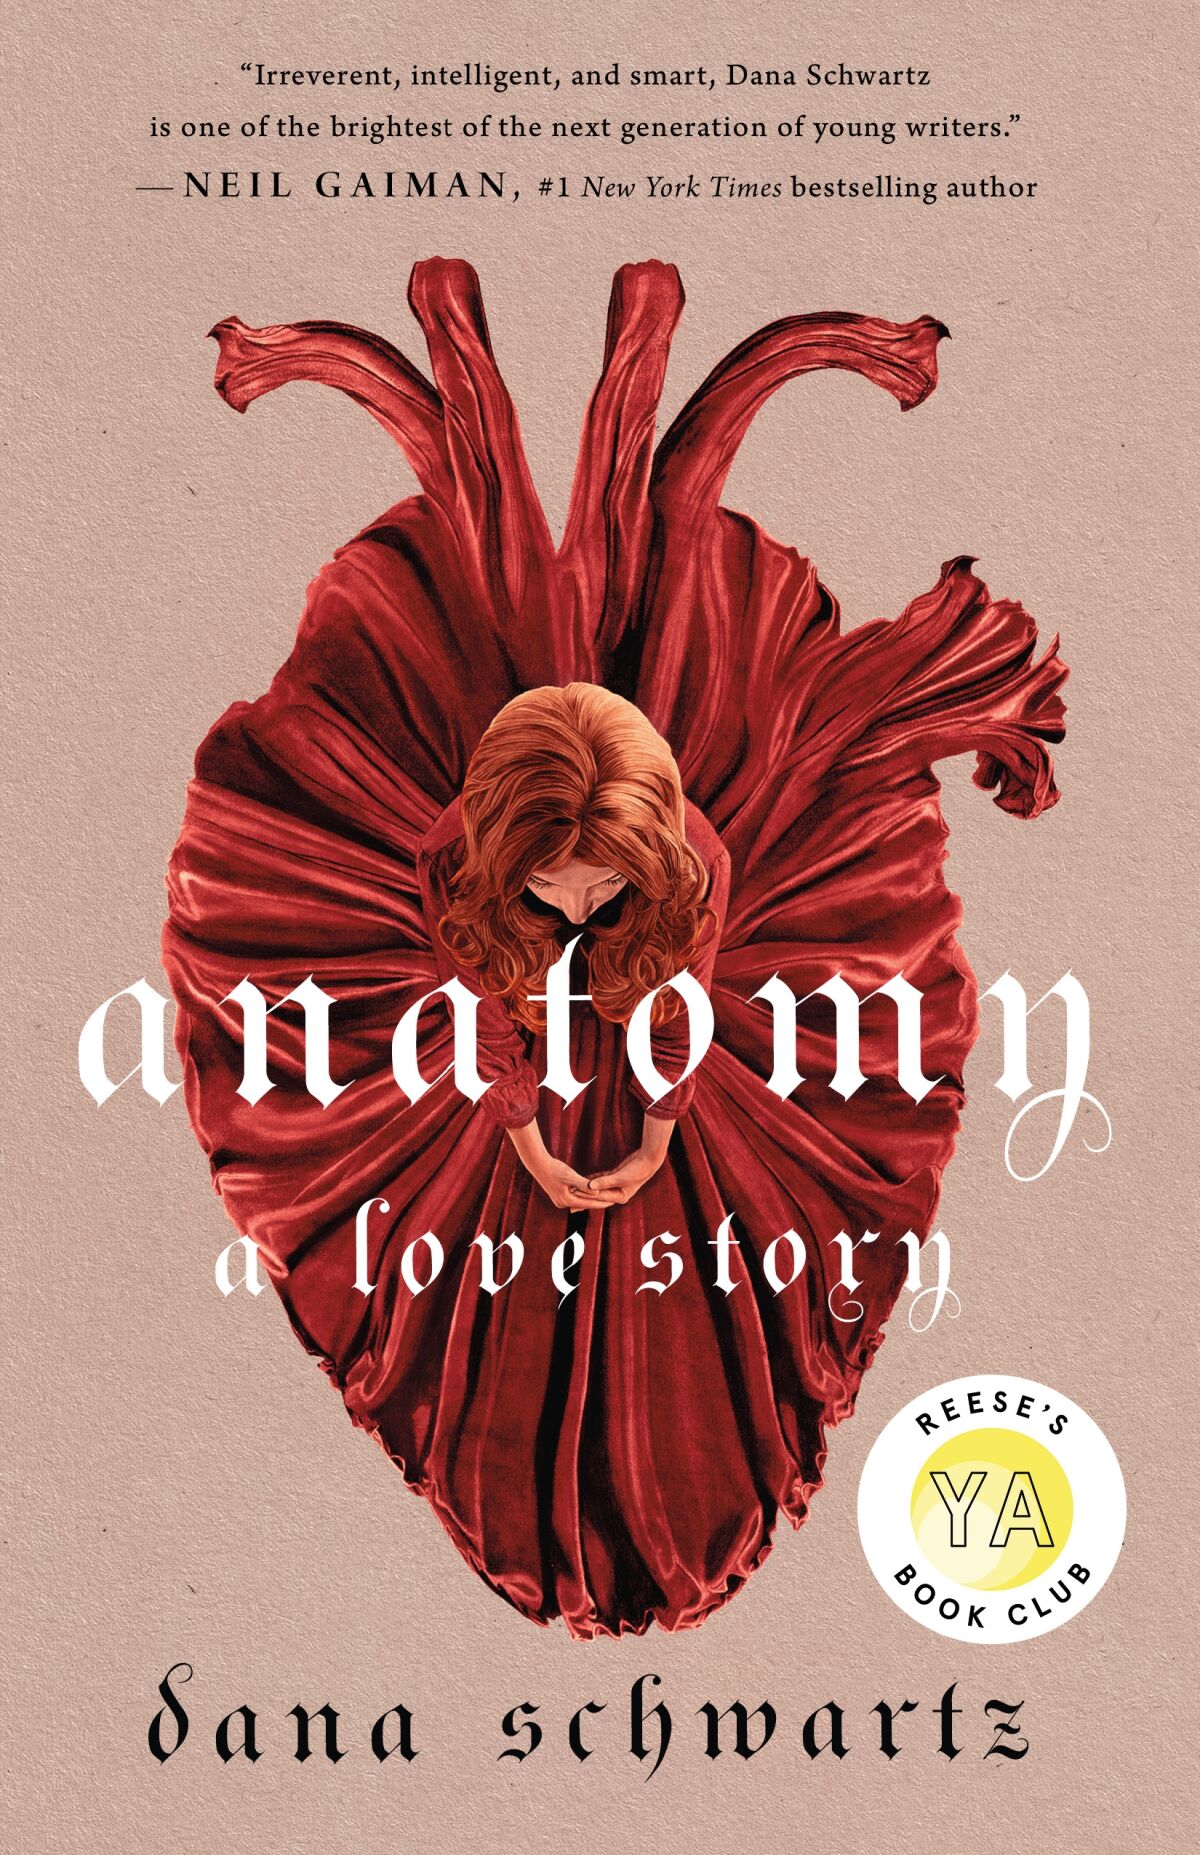 Book cover for "Anatomy: A Love Story"